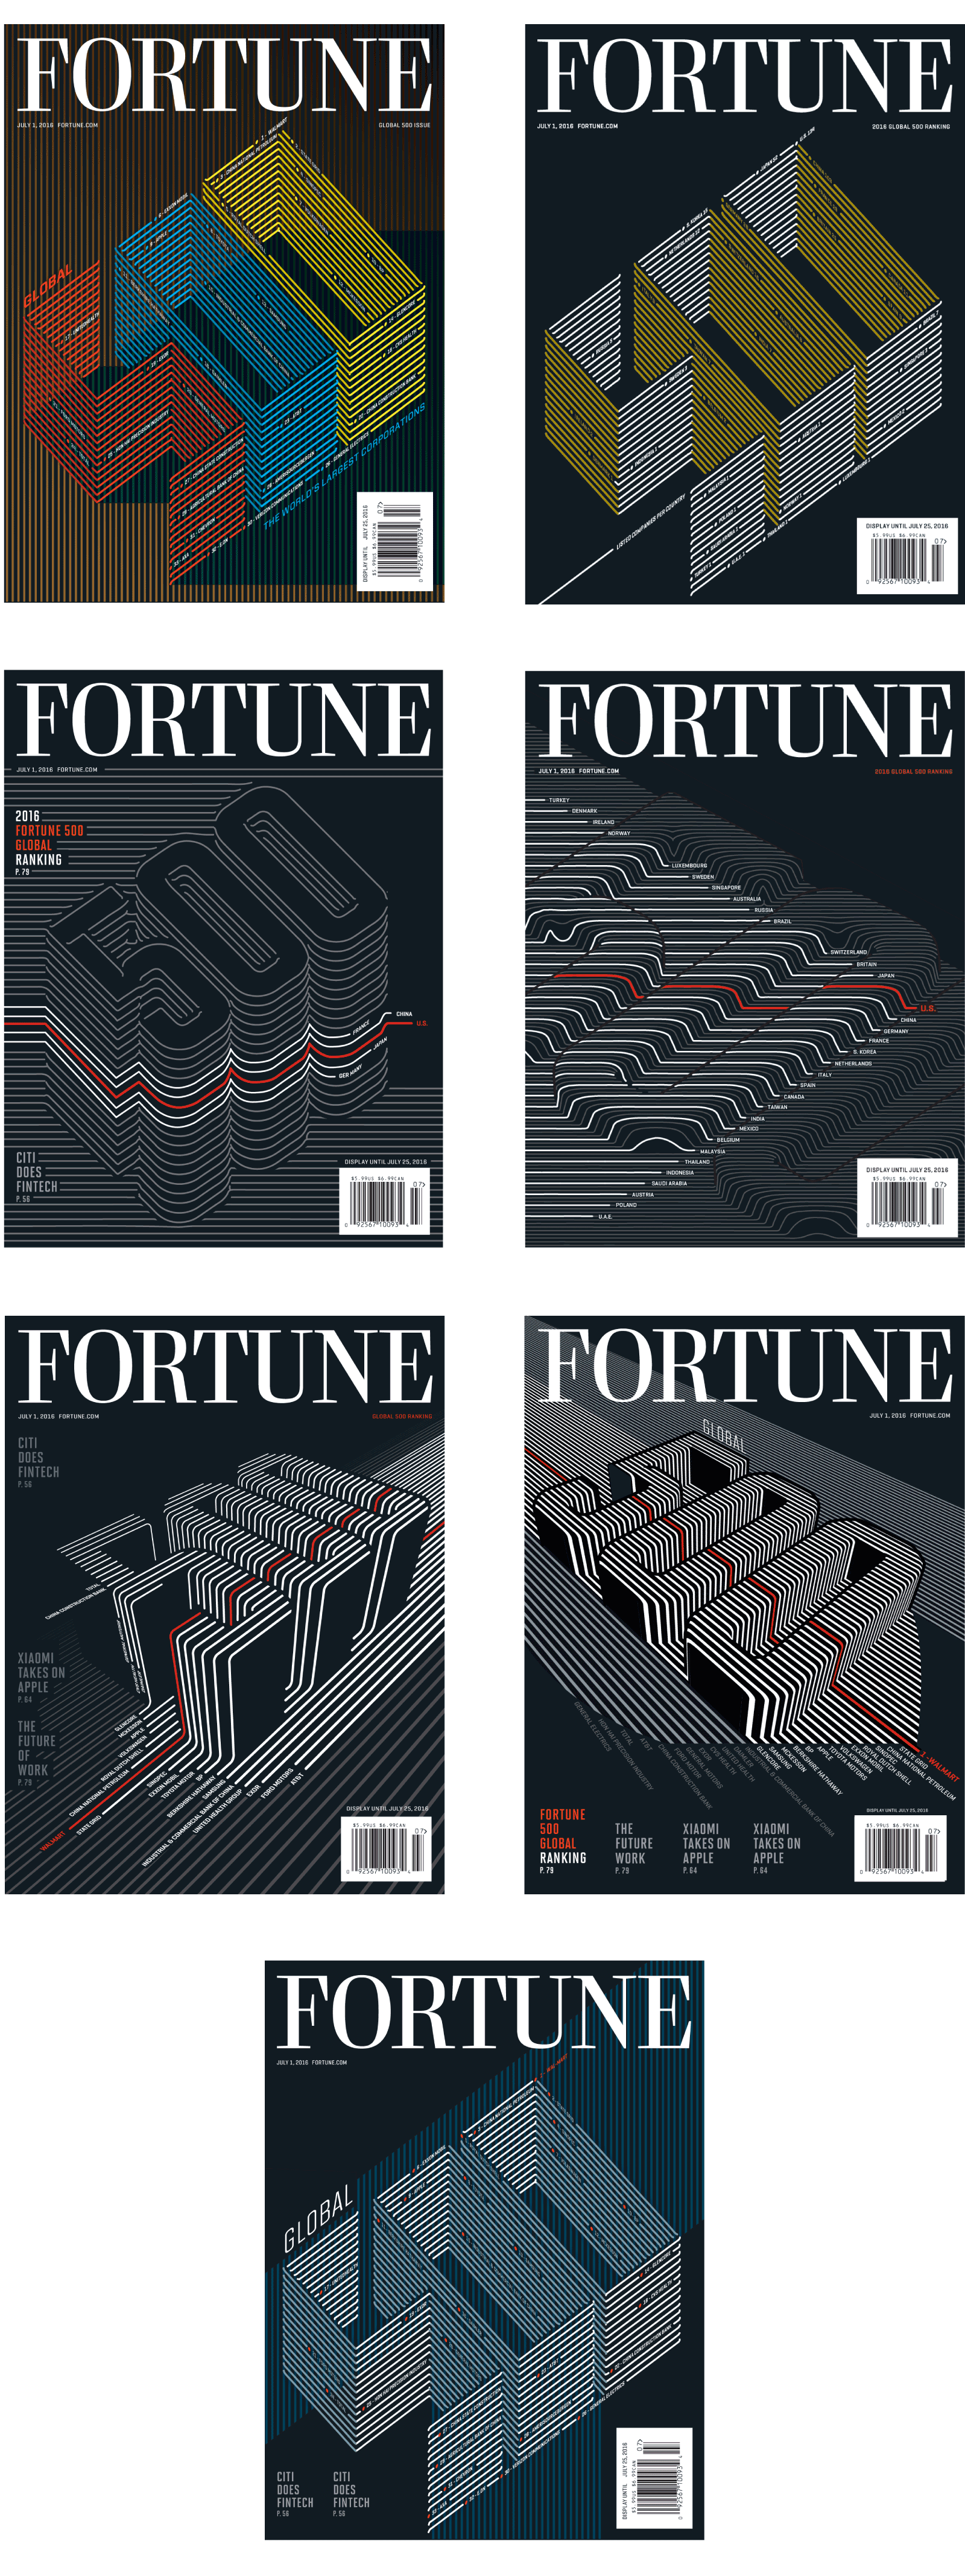 Fortune 500 covers